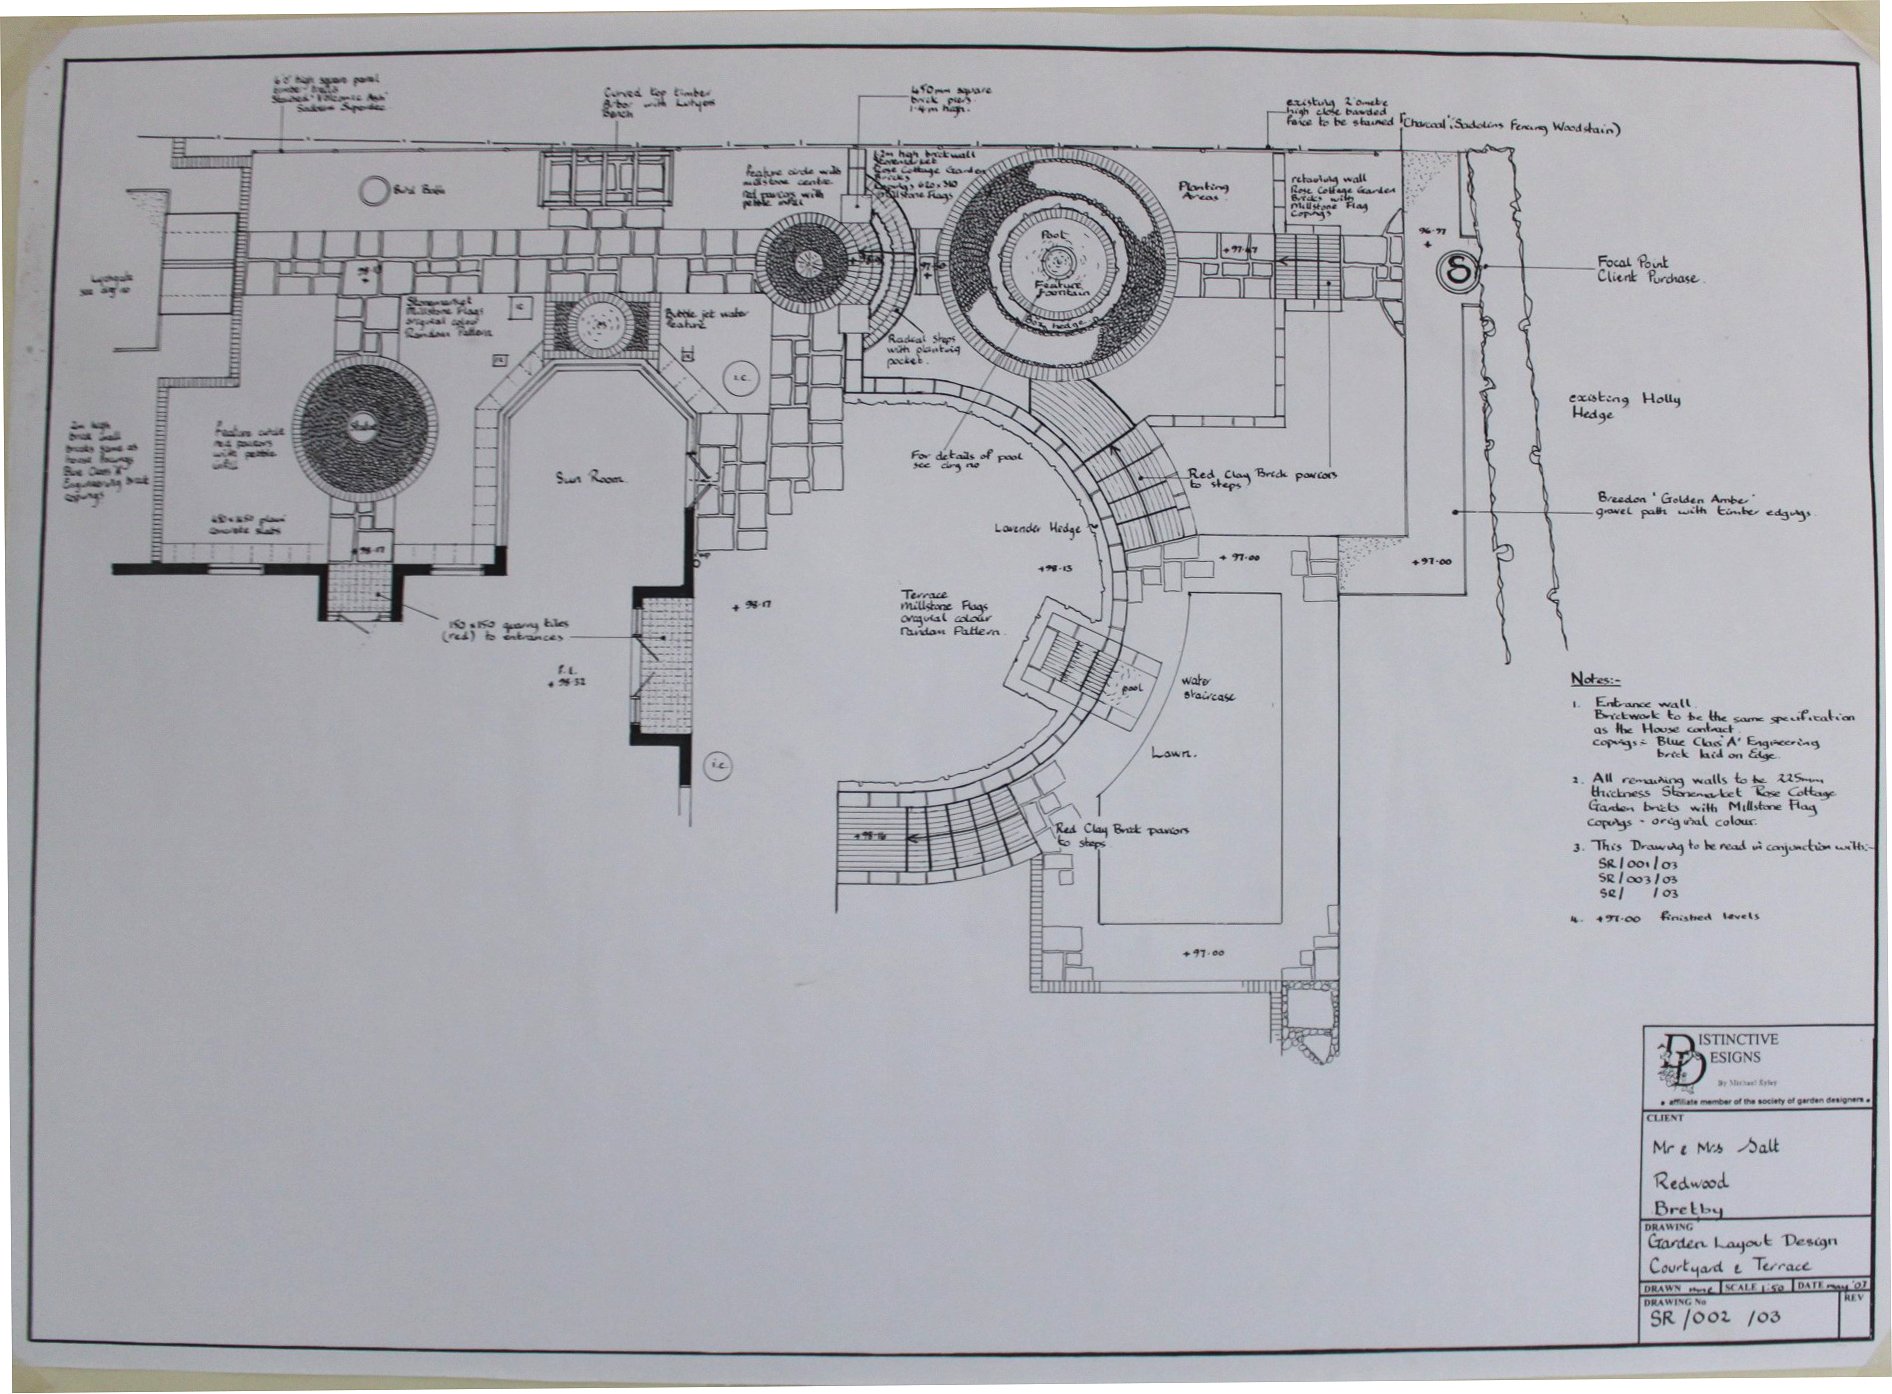 DETAIL PLAN COURTYARD AND TERRACE